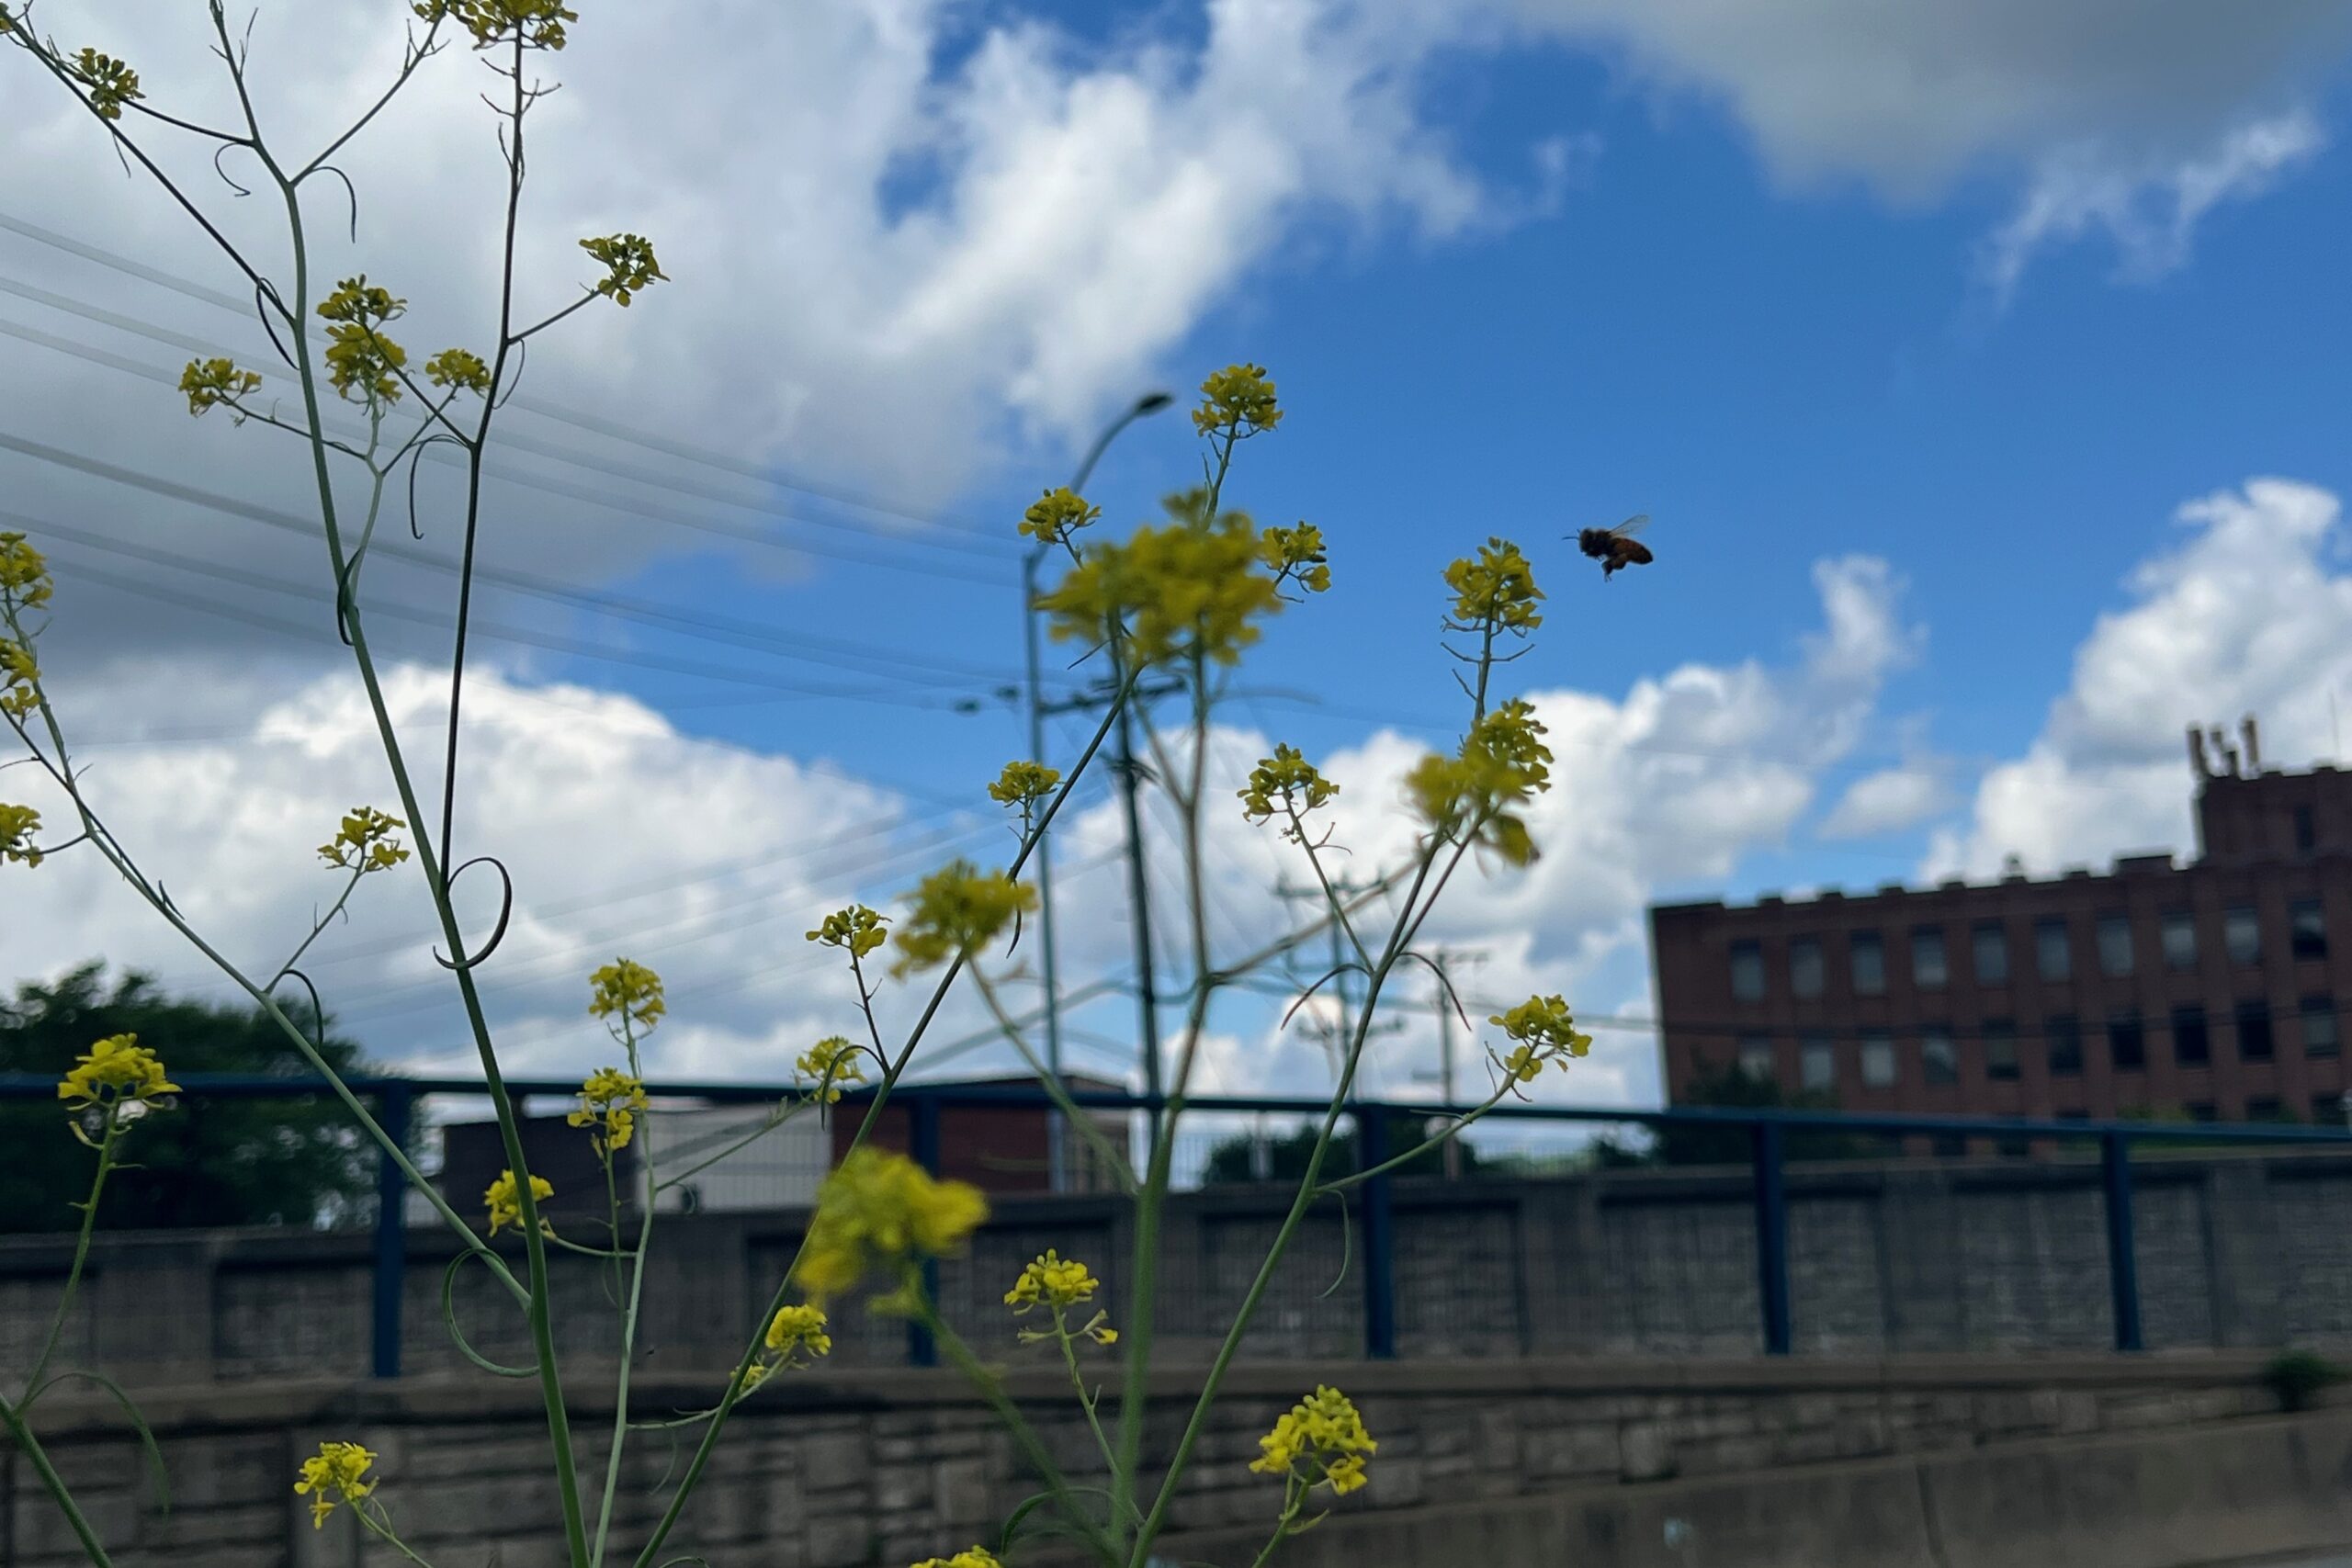 A bee is photoed mid-flight over yellow flowers with a blue sky and industrial buildling in the background